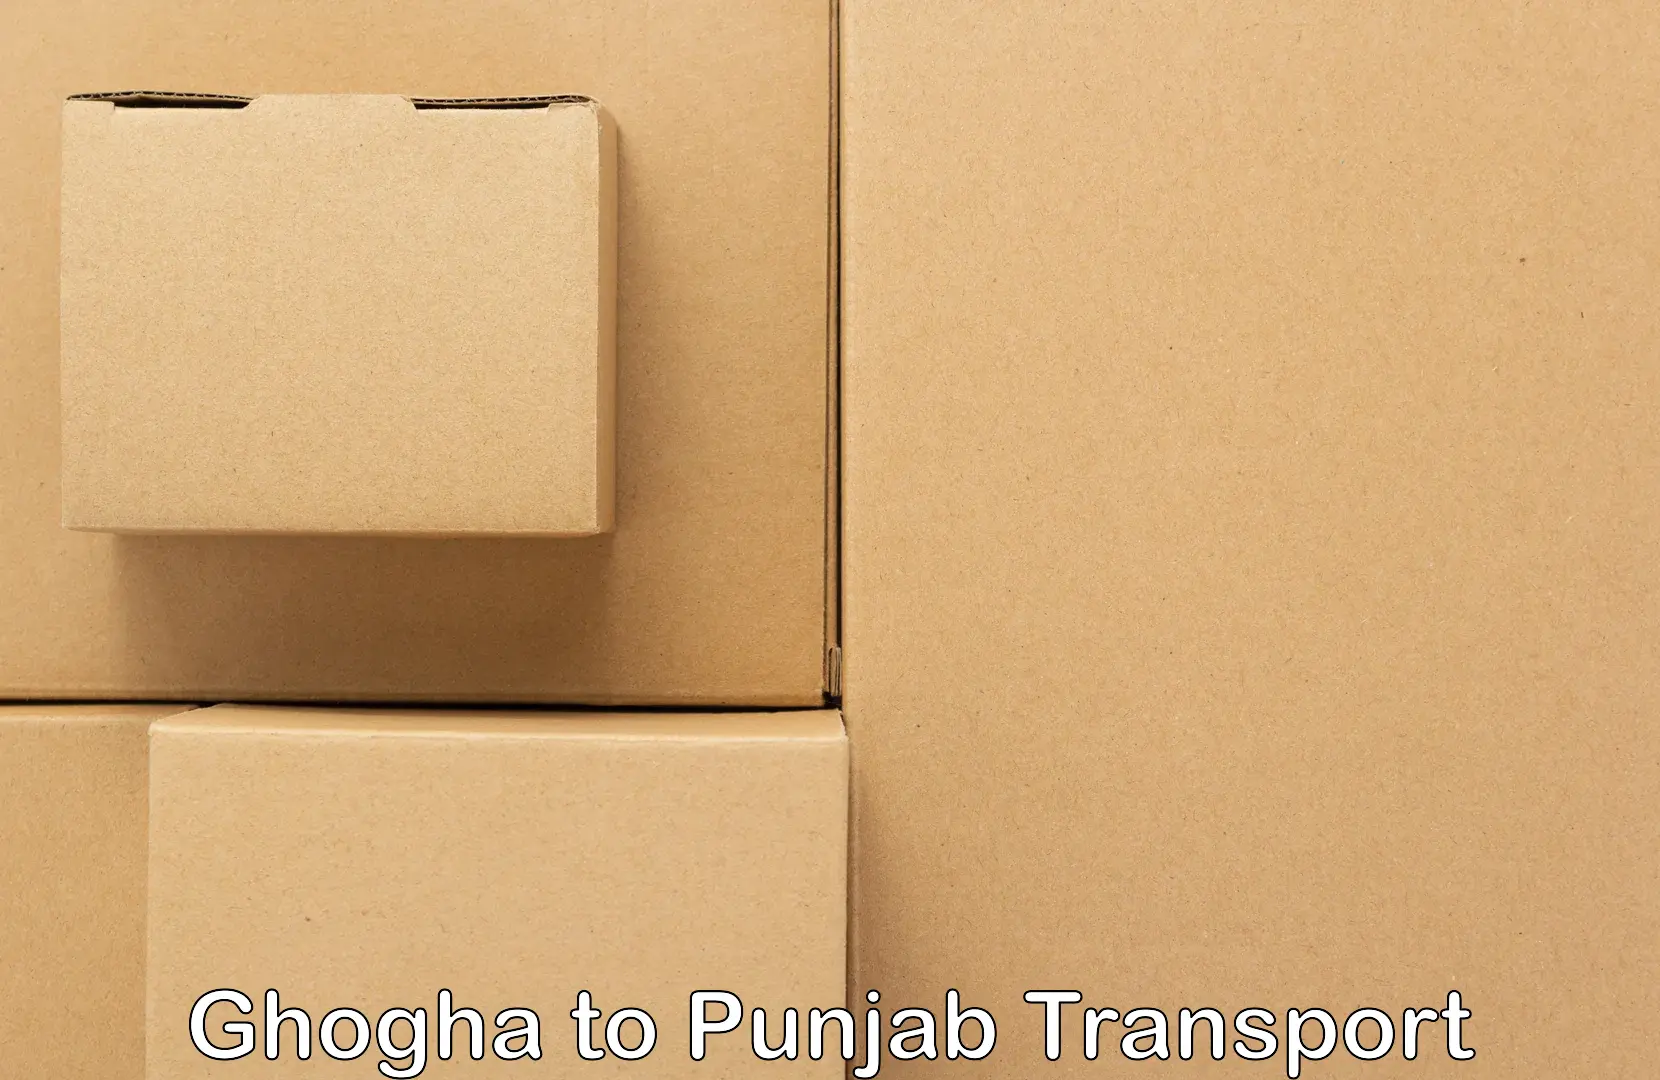 Delivery service Ghogha to Dhuri